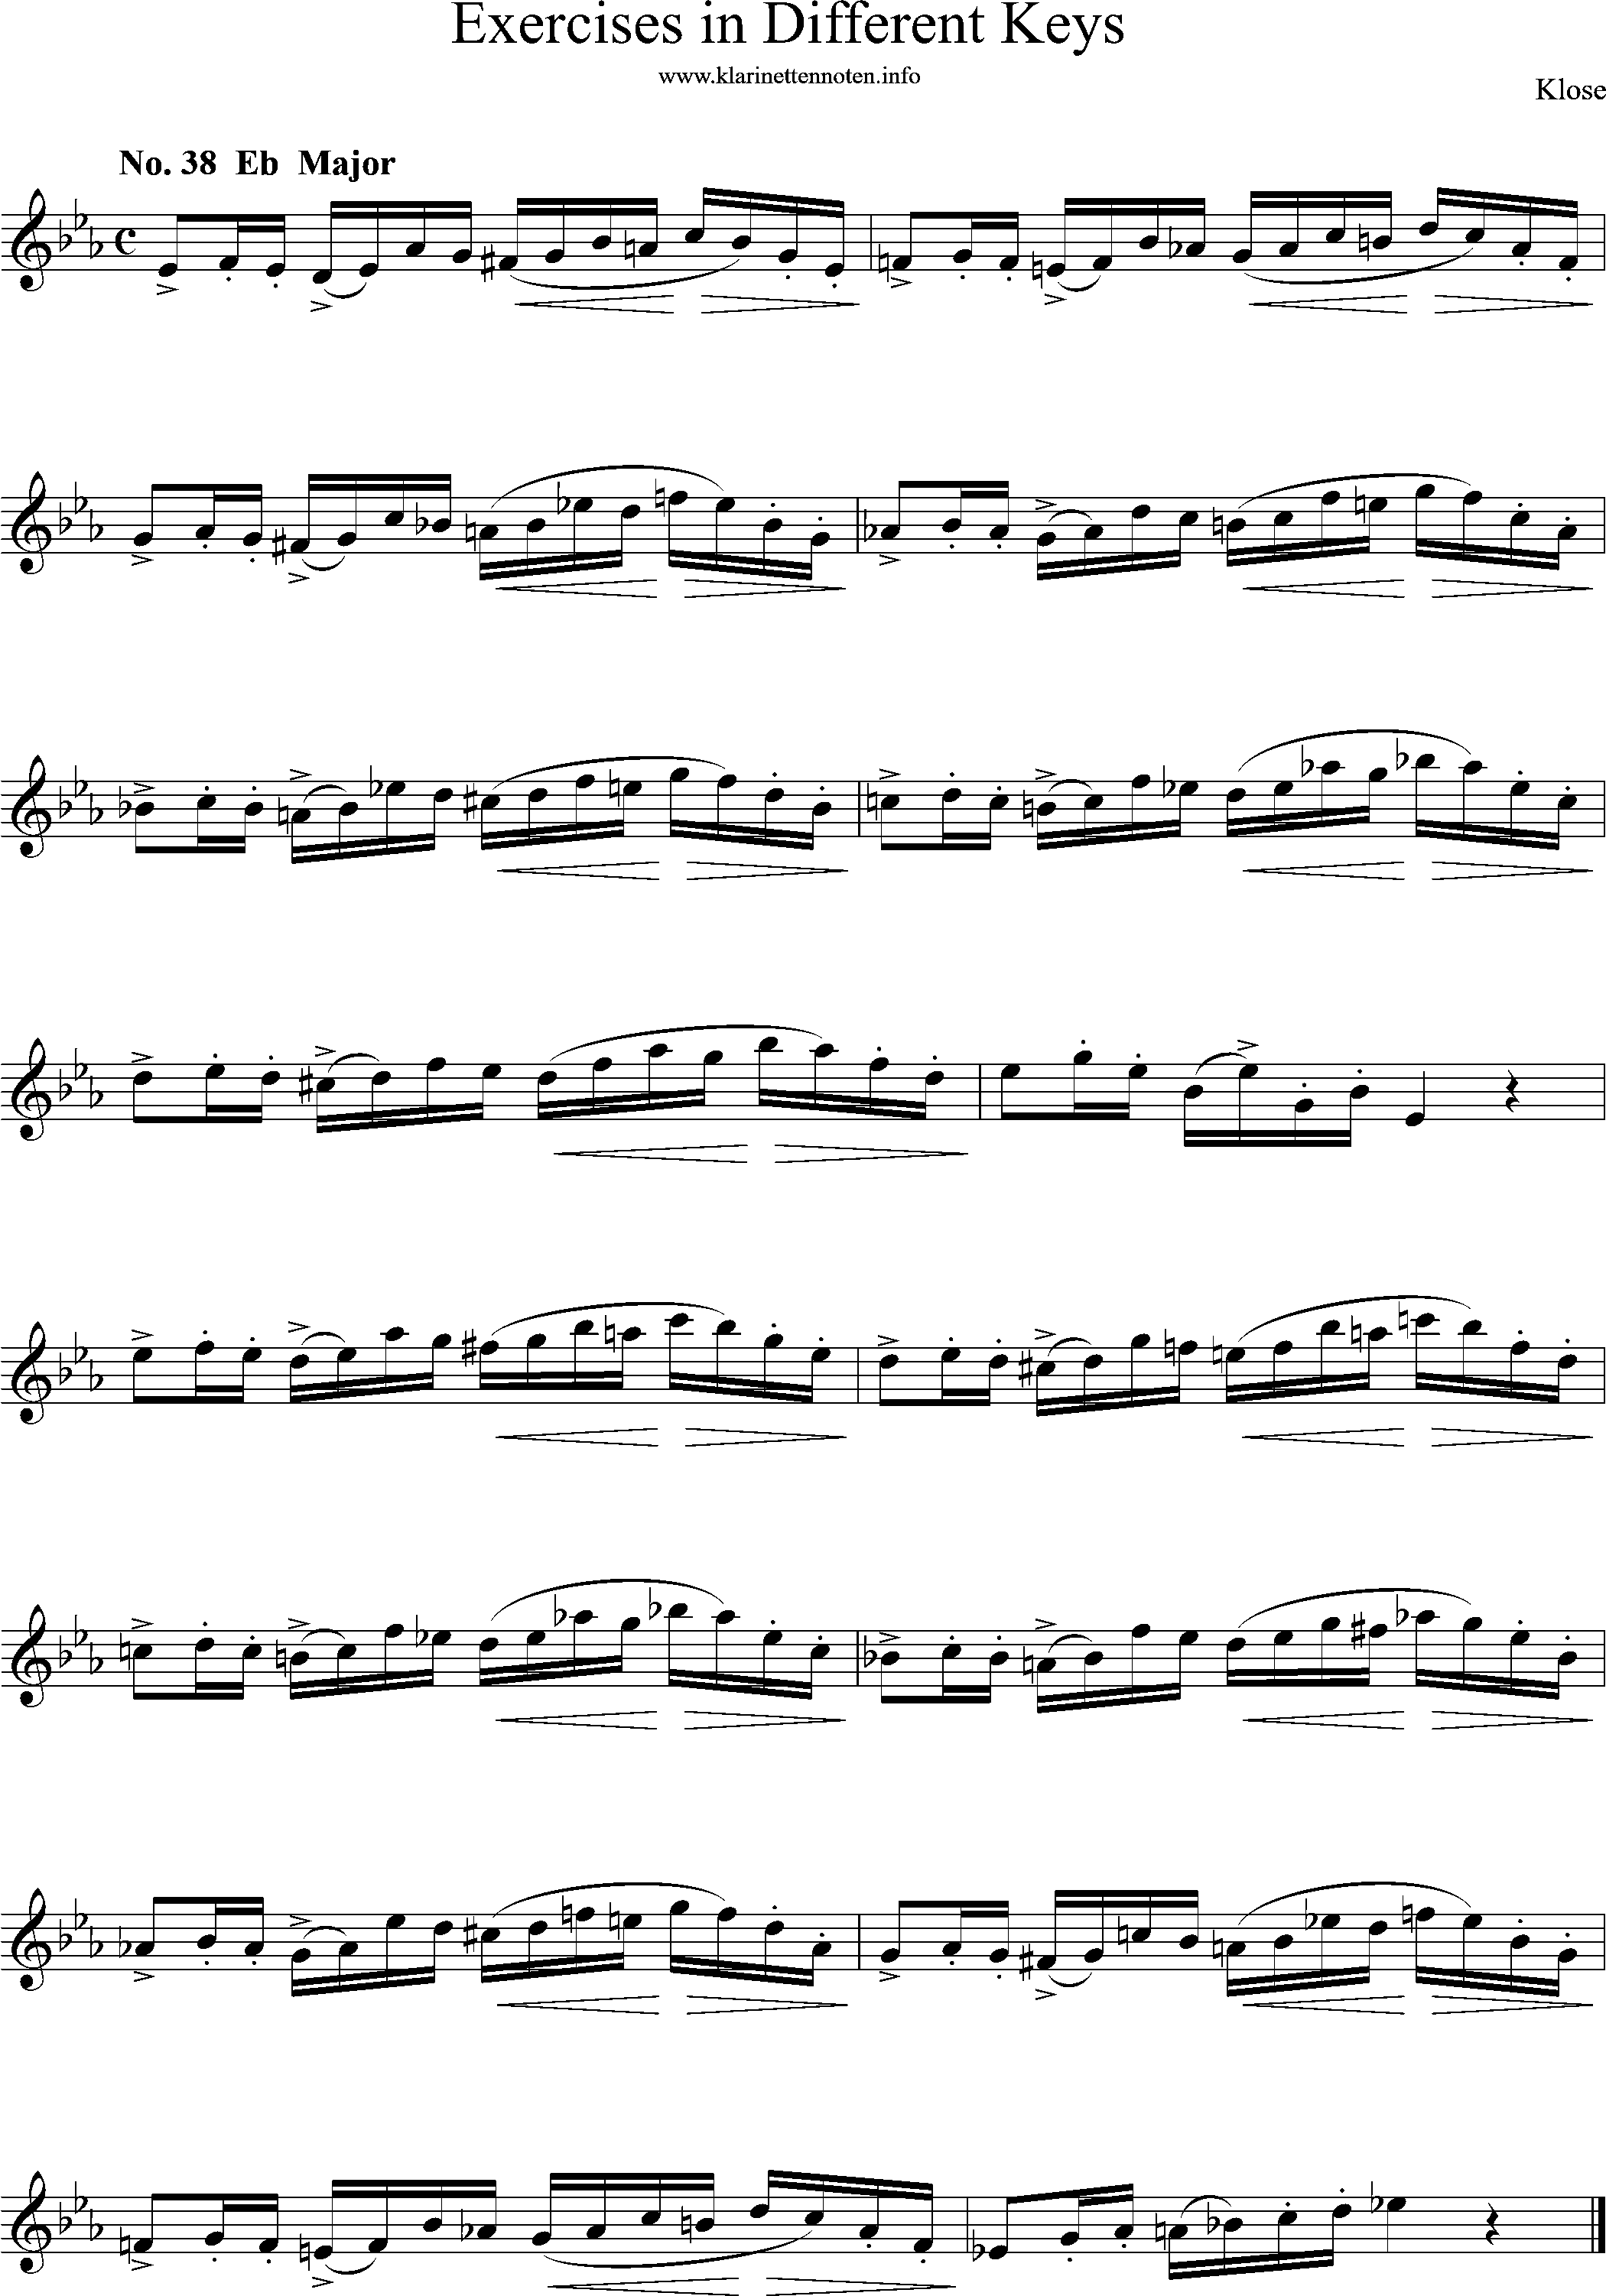 Exercises in Differewnt Keys, klose, No-38, Eb-Major